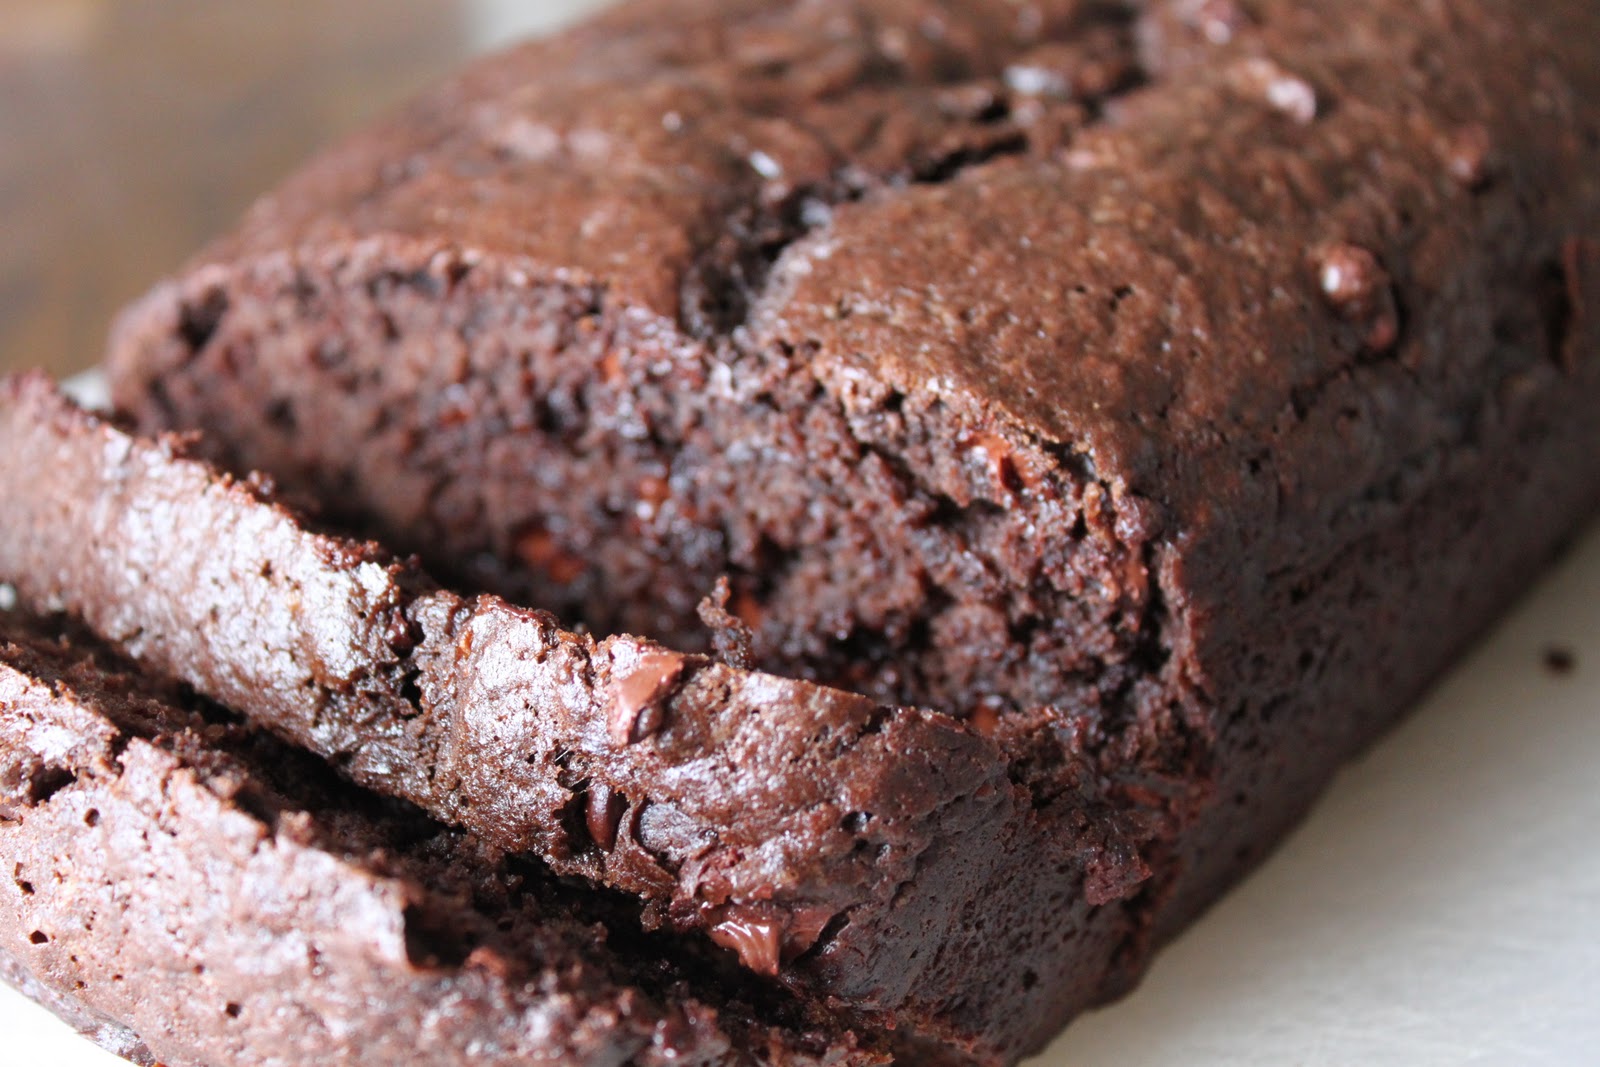 The Styled Life: Foodie Fridays: Chocolate Banana Bread